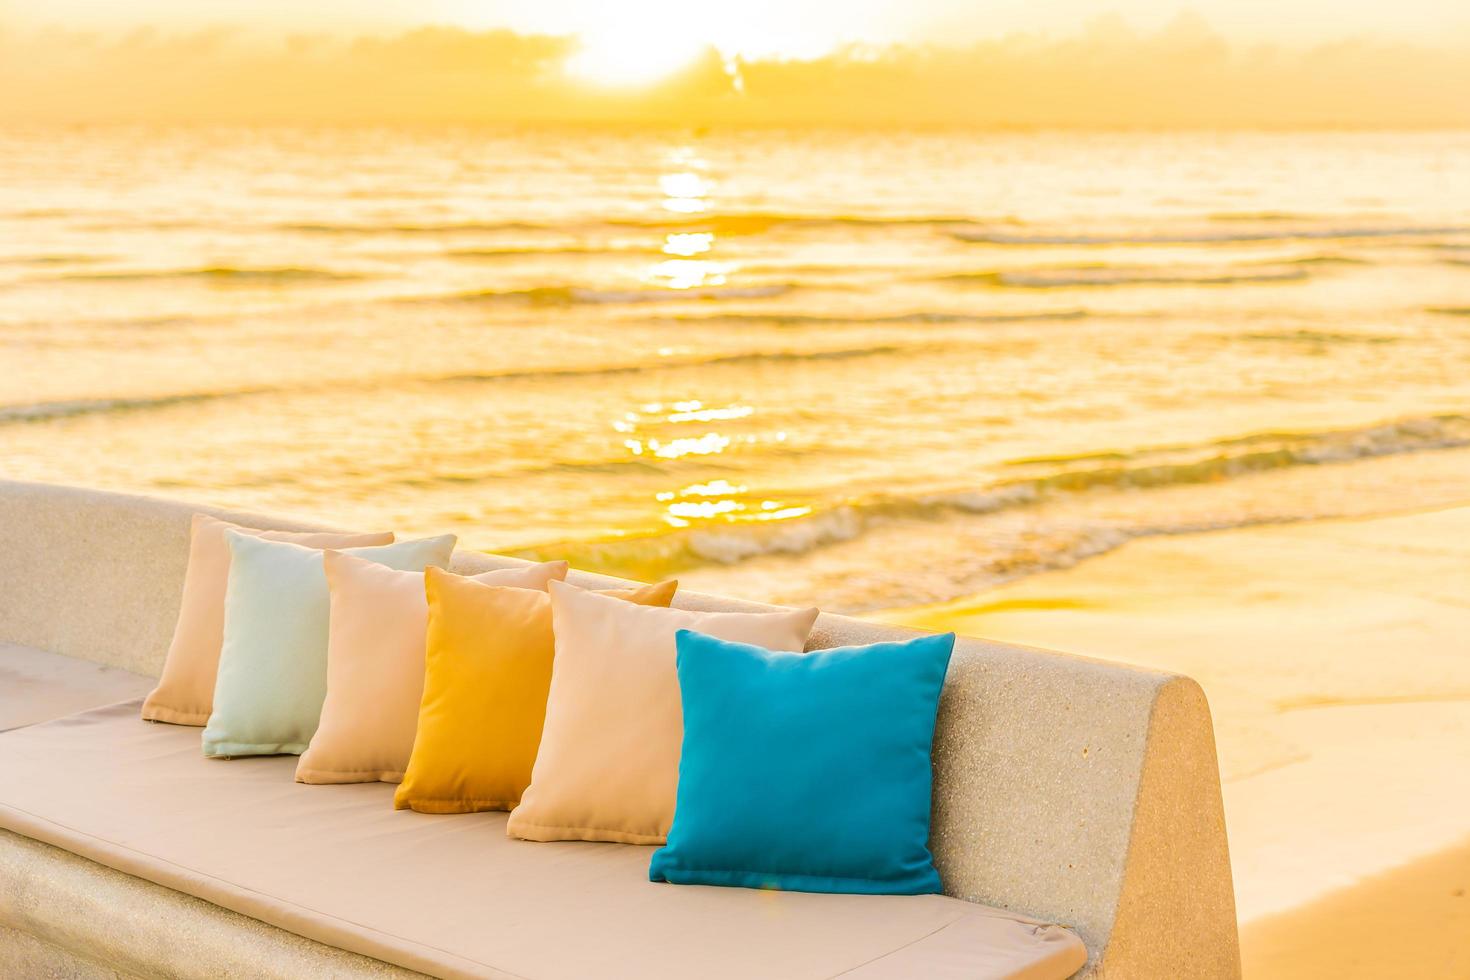 Comfortable pillow on sofa chair with ocean beach view photo